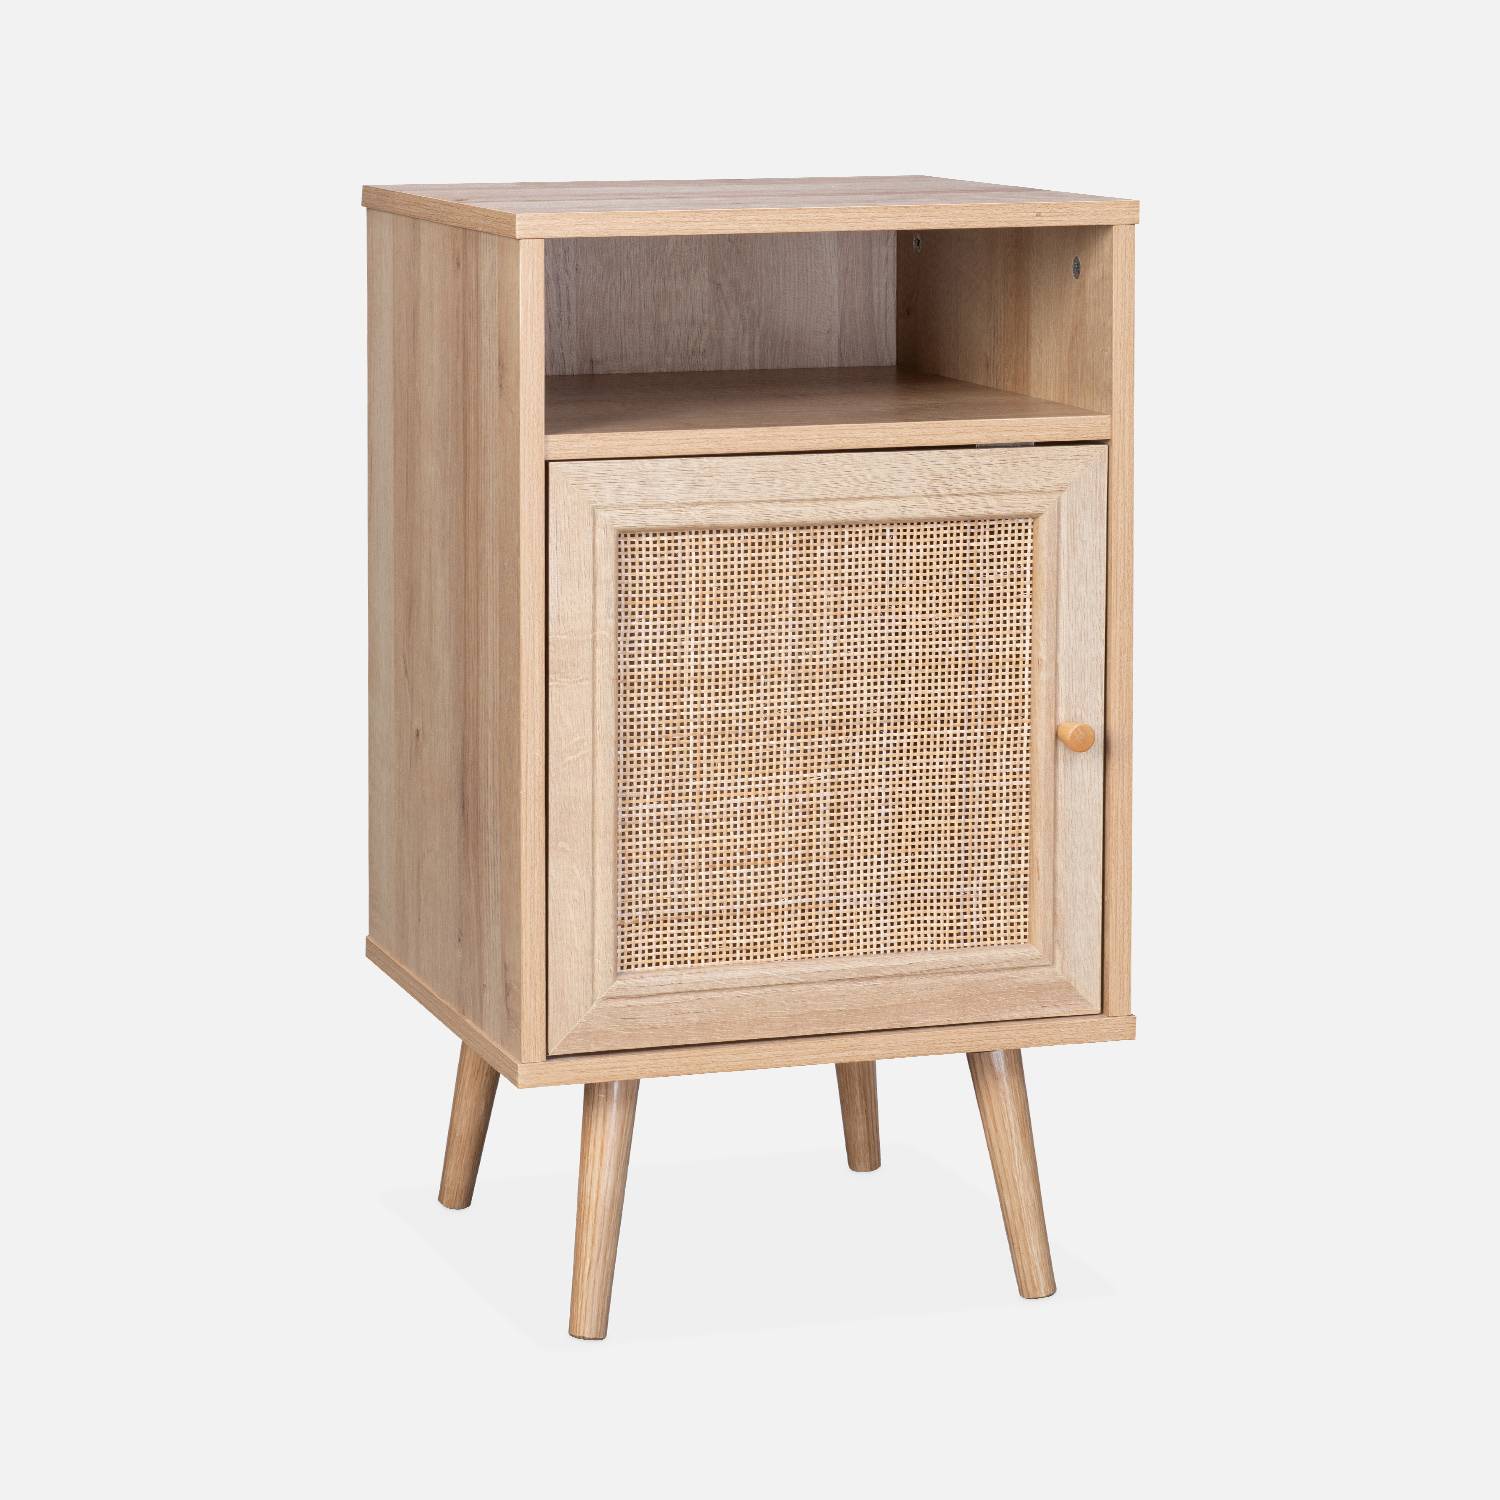 Scandi-style wood and cane rattan bedside table with cupboard, 40x39x70cm, Natural Wood colour | sweeek